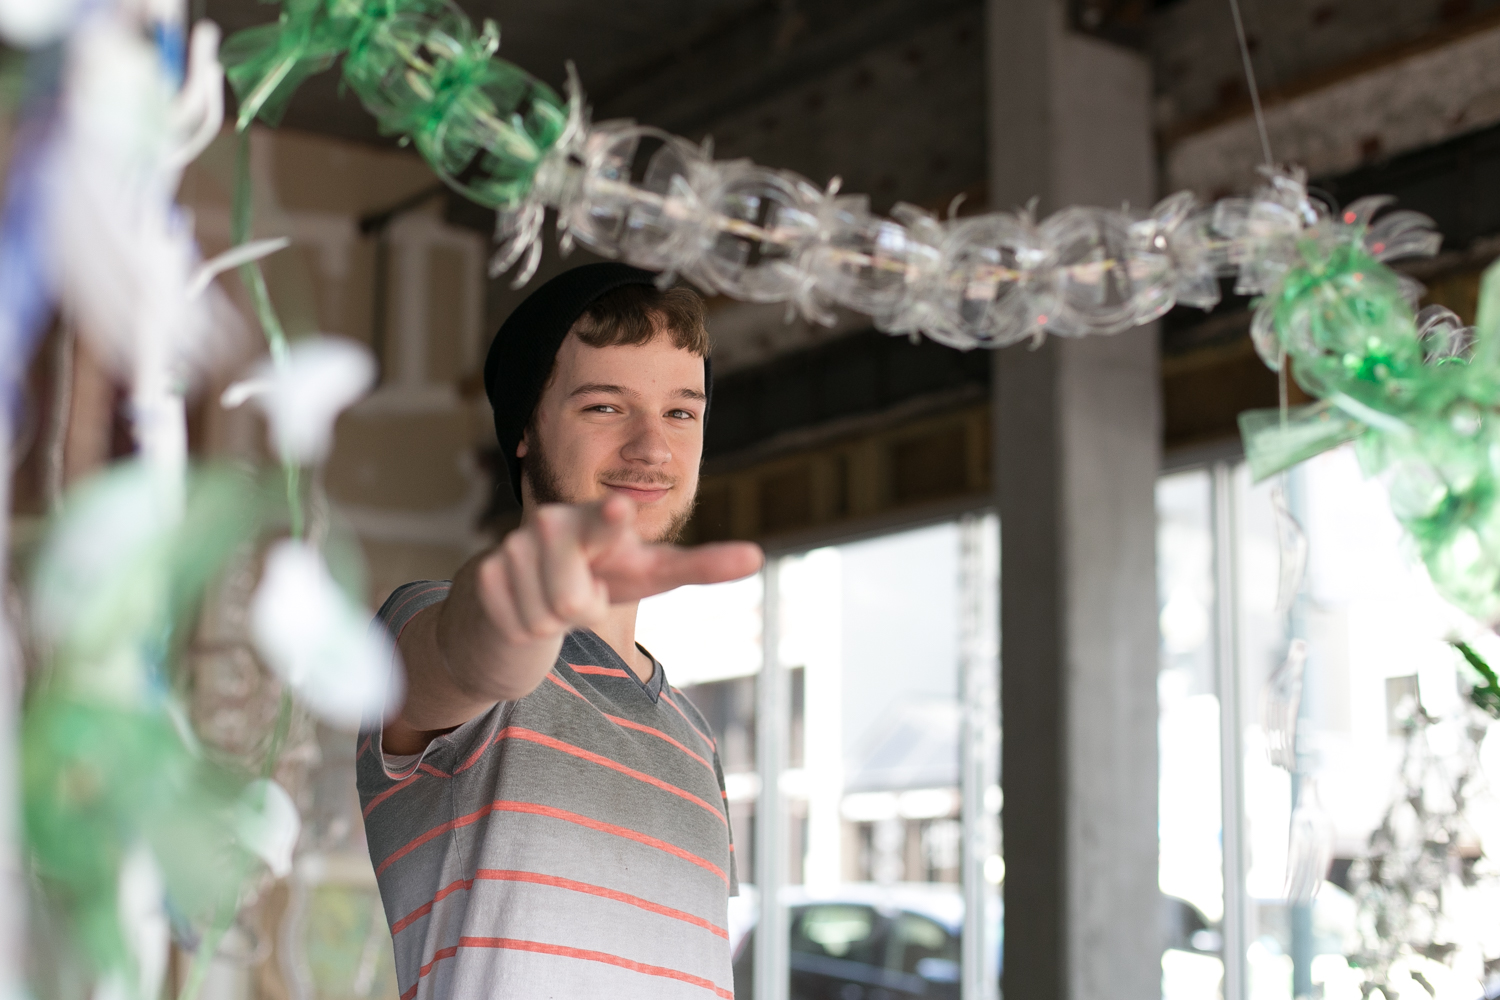   Tyler is an architecture student at the University of Memphis. He built a giant sculpture with his classmates out of recycled bottles and plastic forks.   